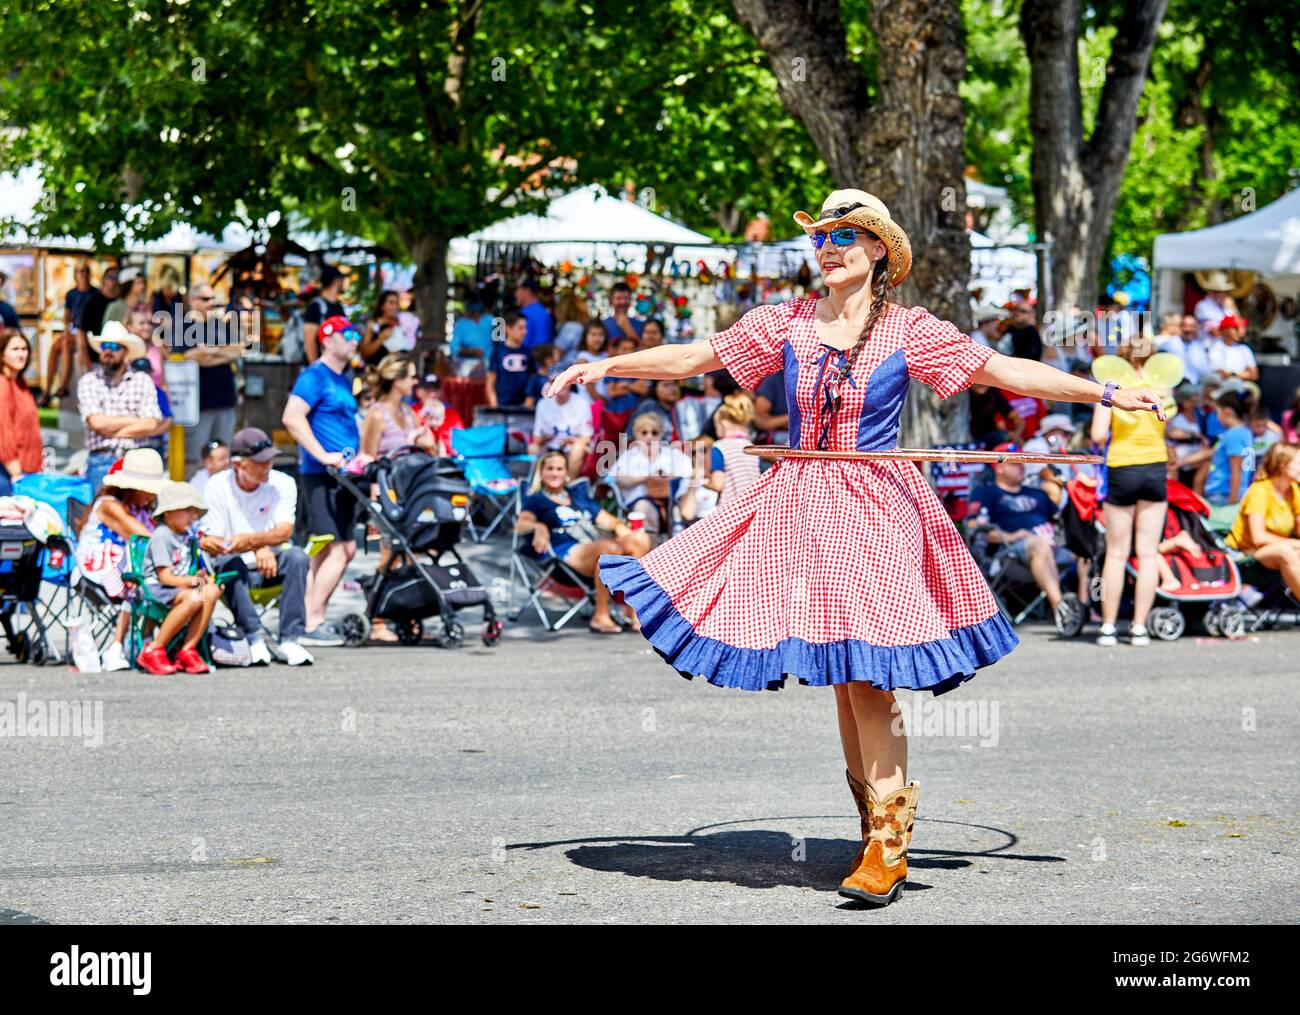 Prescott, Arizona, USA - July 3, 2021: Woman spinning the hula hoop while marching in the 4th of July parade Stock Photo